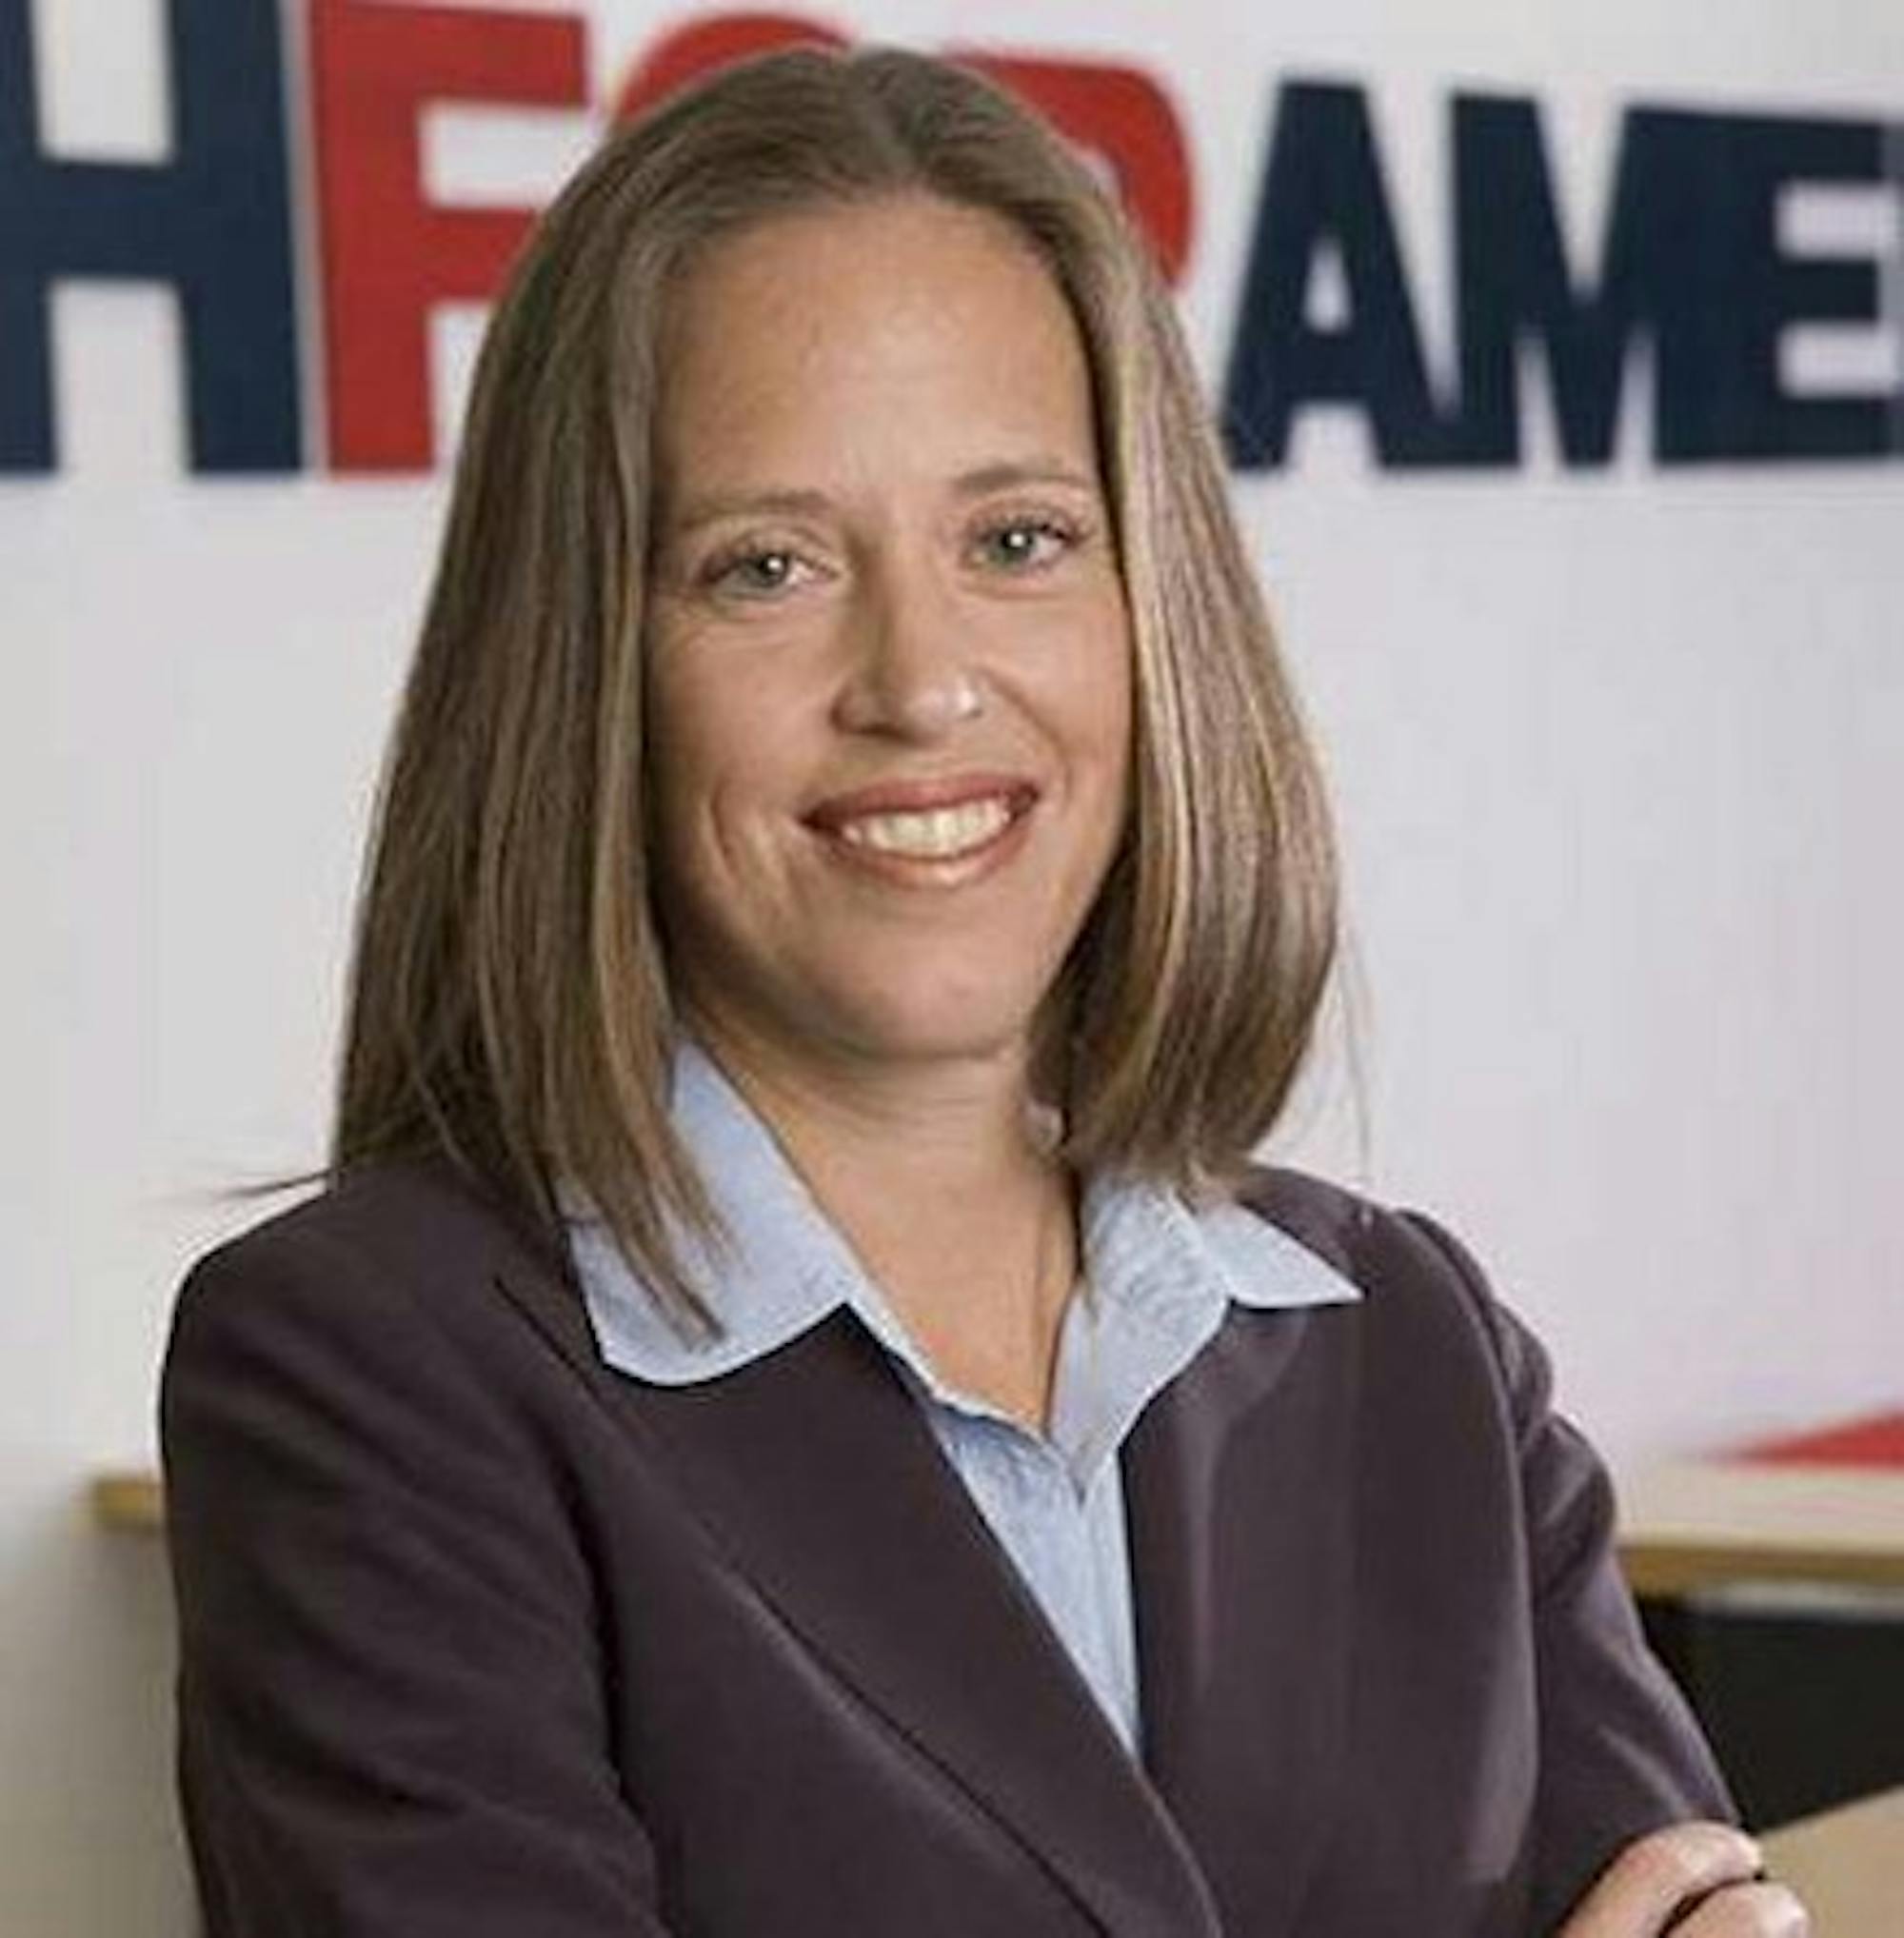 Wendy Kopp, the CEO and founder of Teach for America, will deliver this year's Commencement address to the graduating Class of 2012.